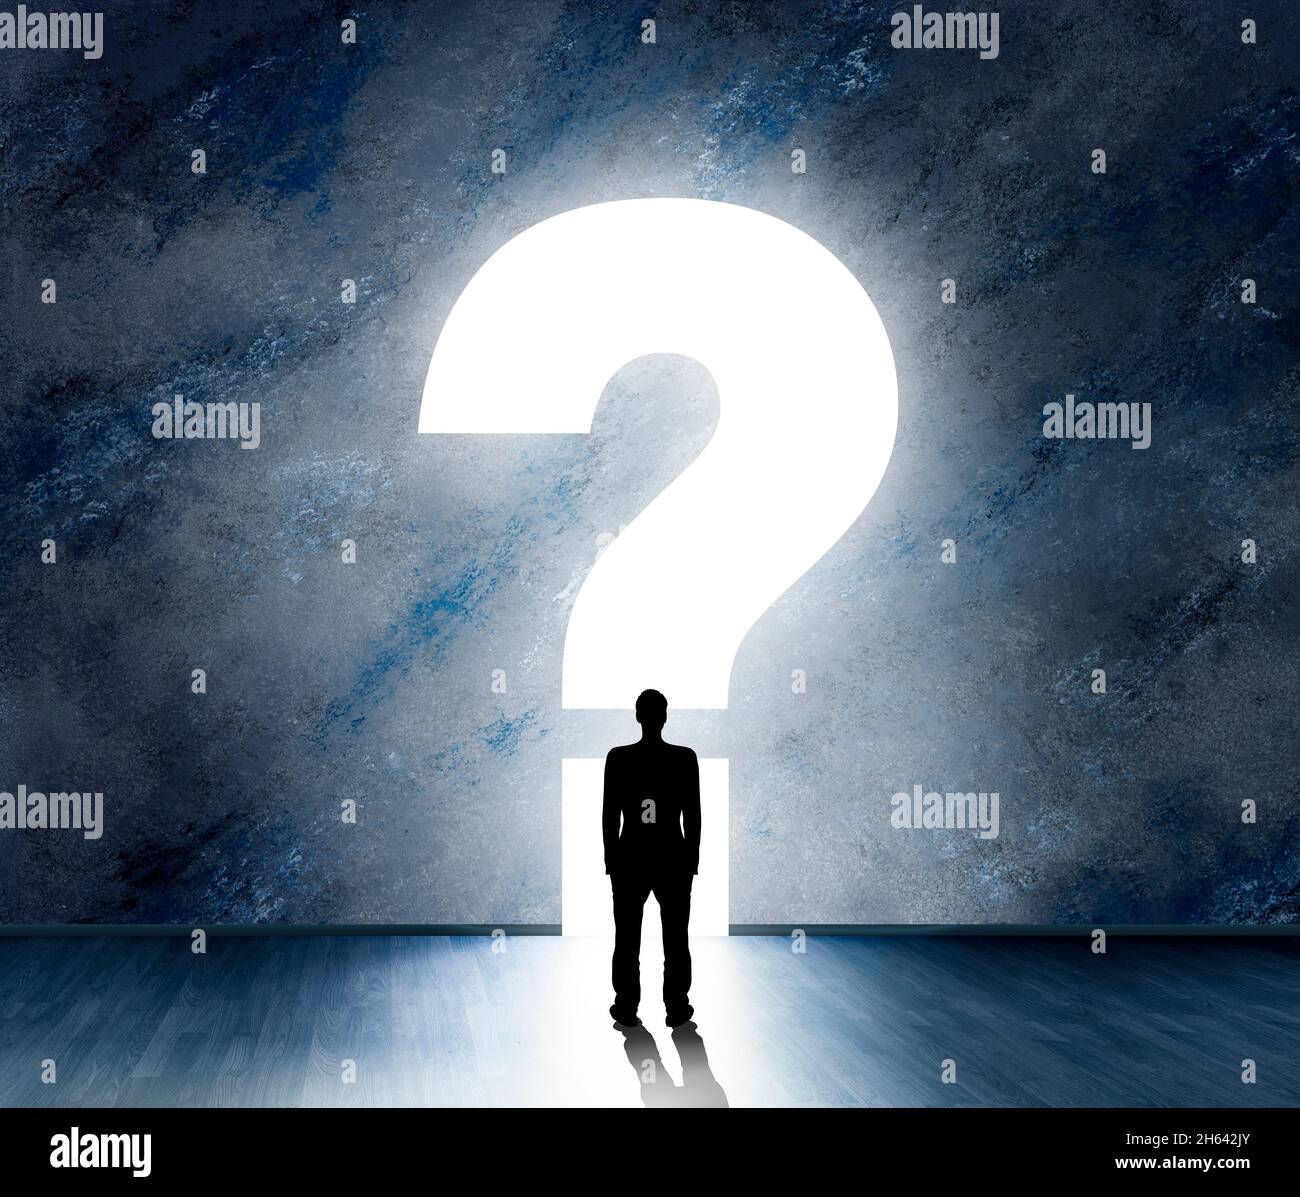 silhouette of a male person in front of a question mark Stock Photo